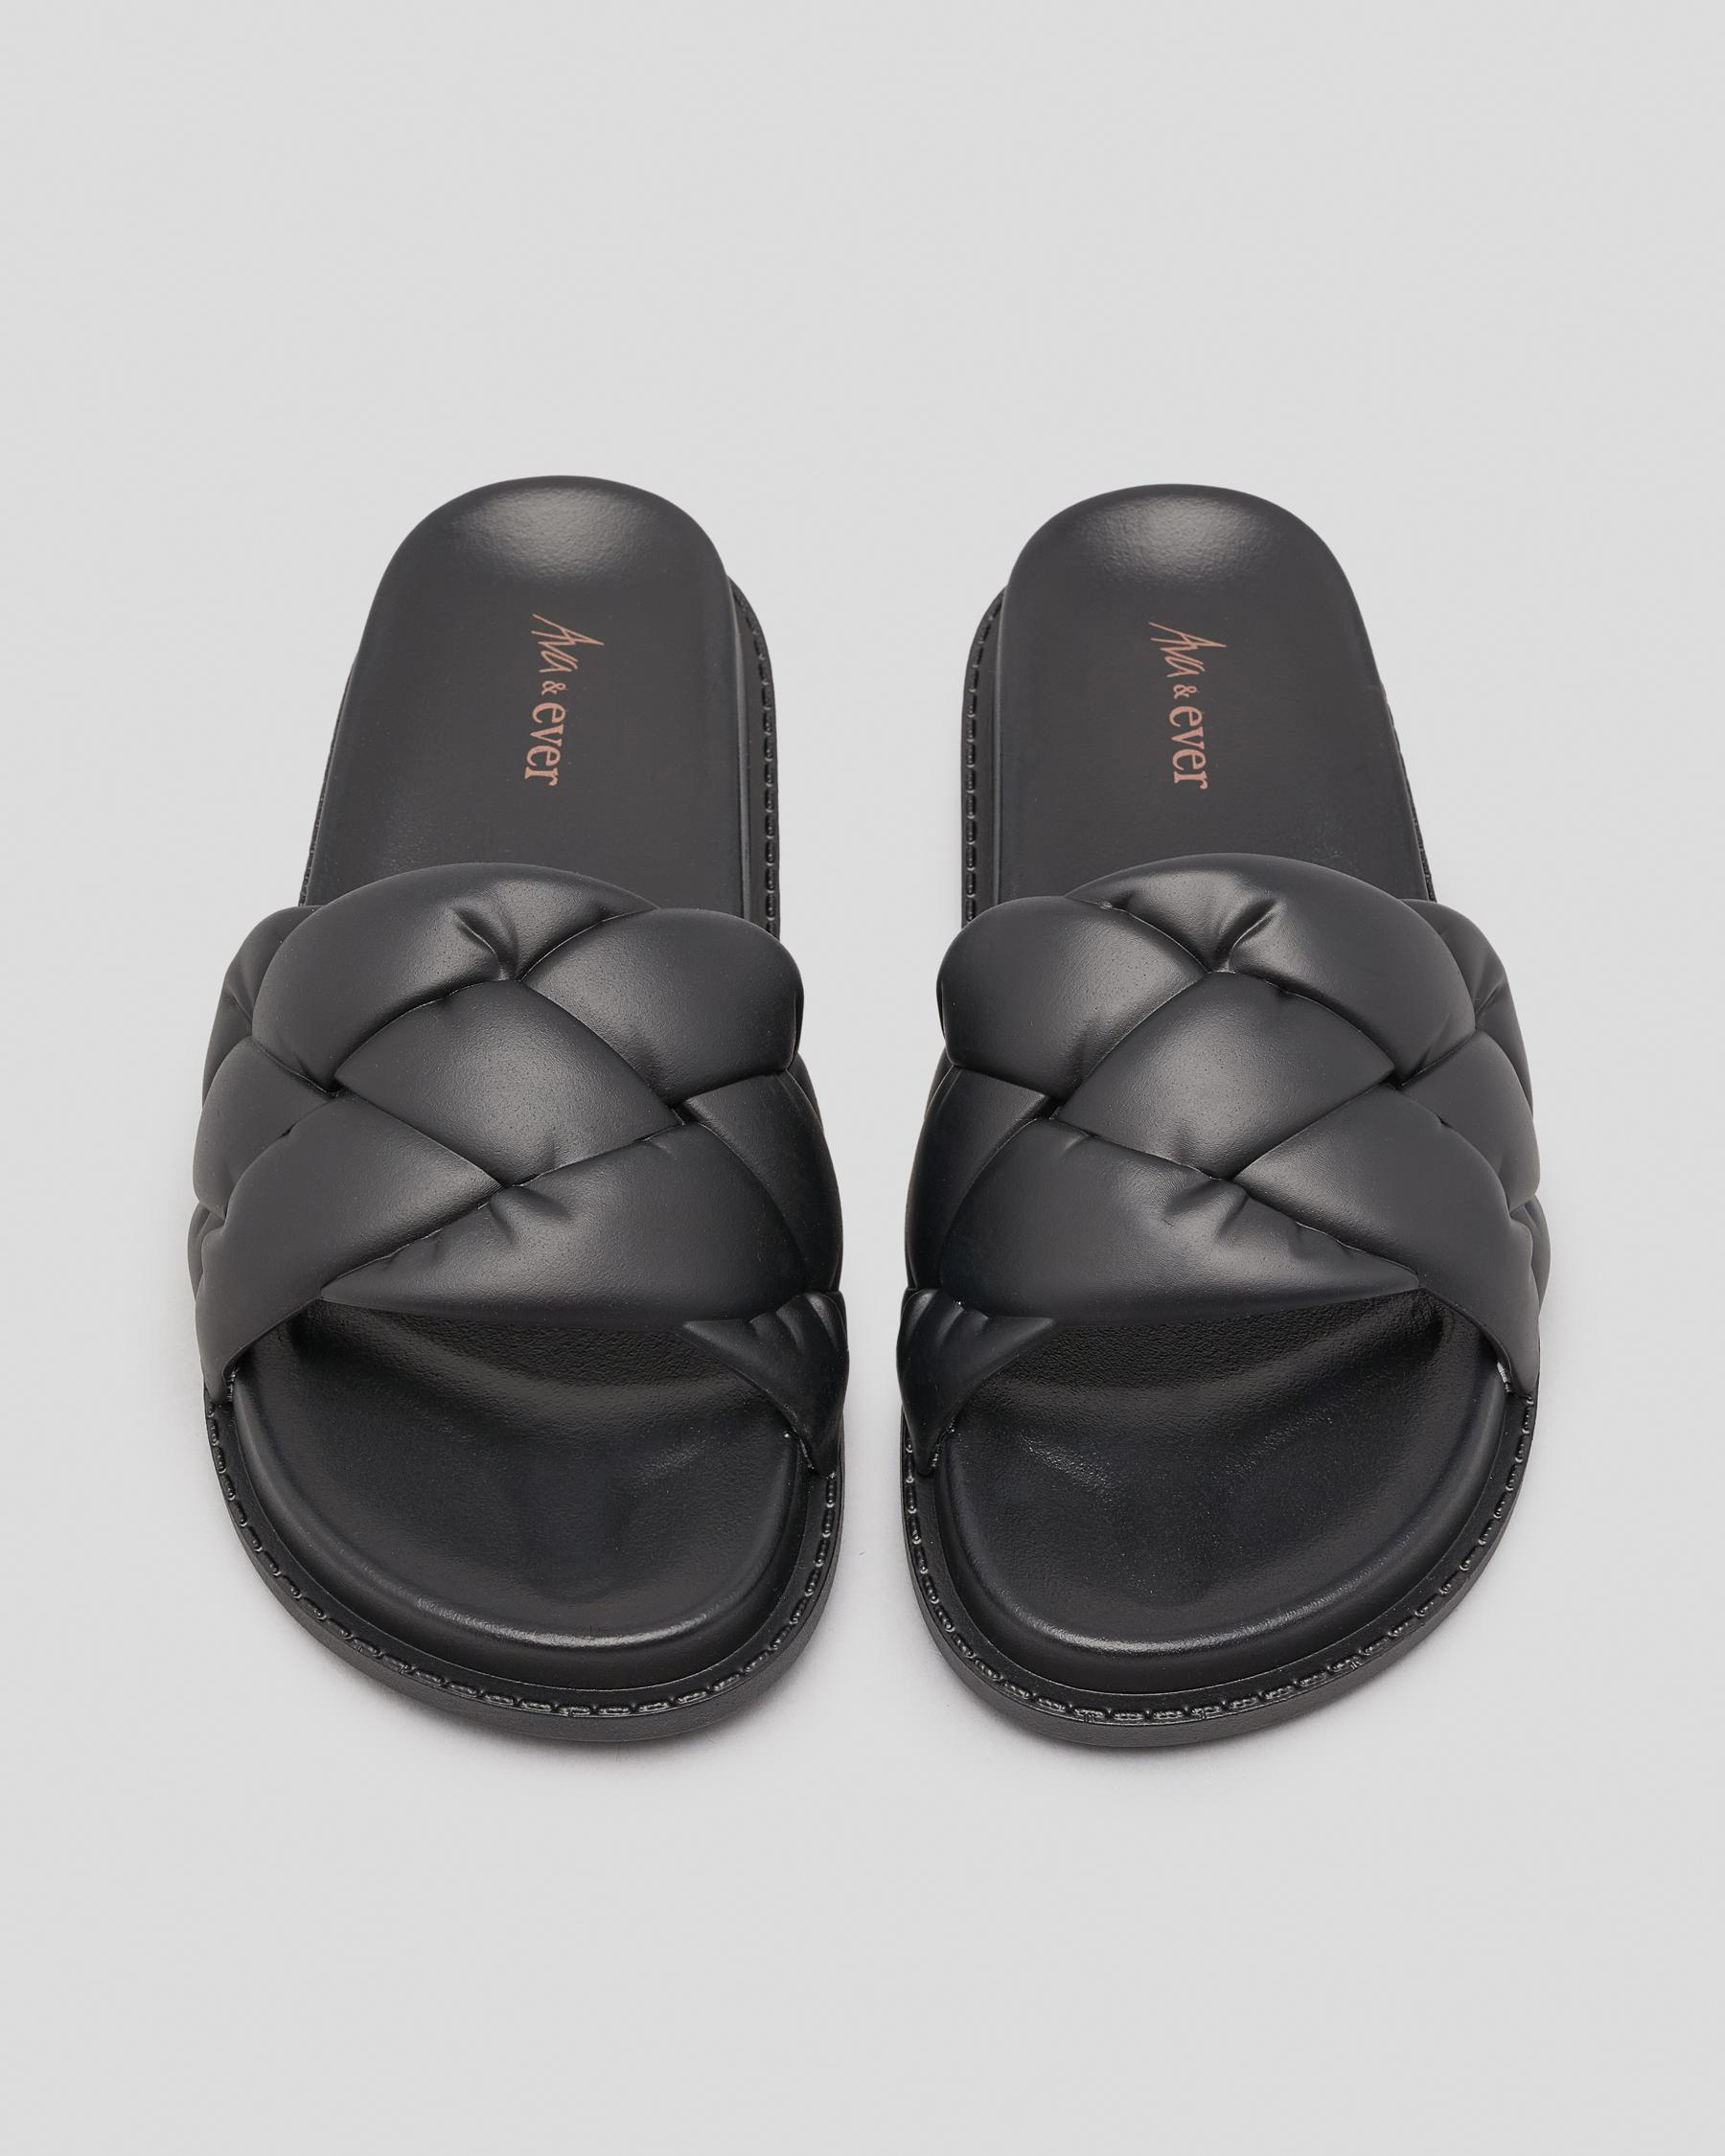 Ava And Ever Keira Slide Sandals In Black - Fast Shipping & Easy ...